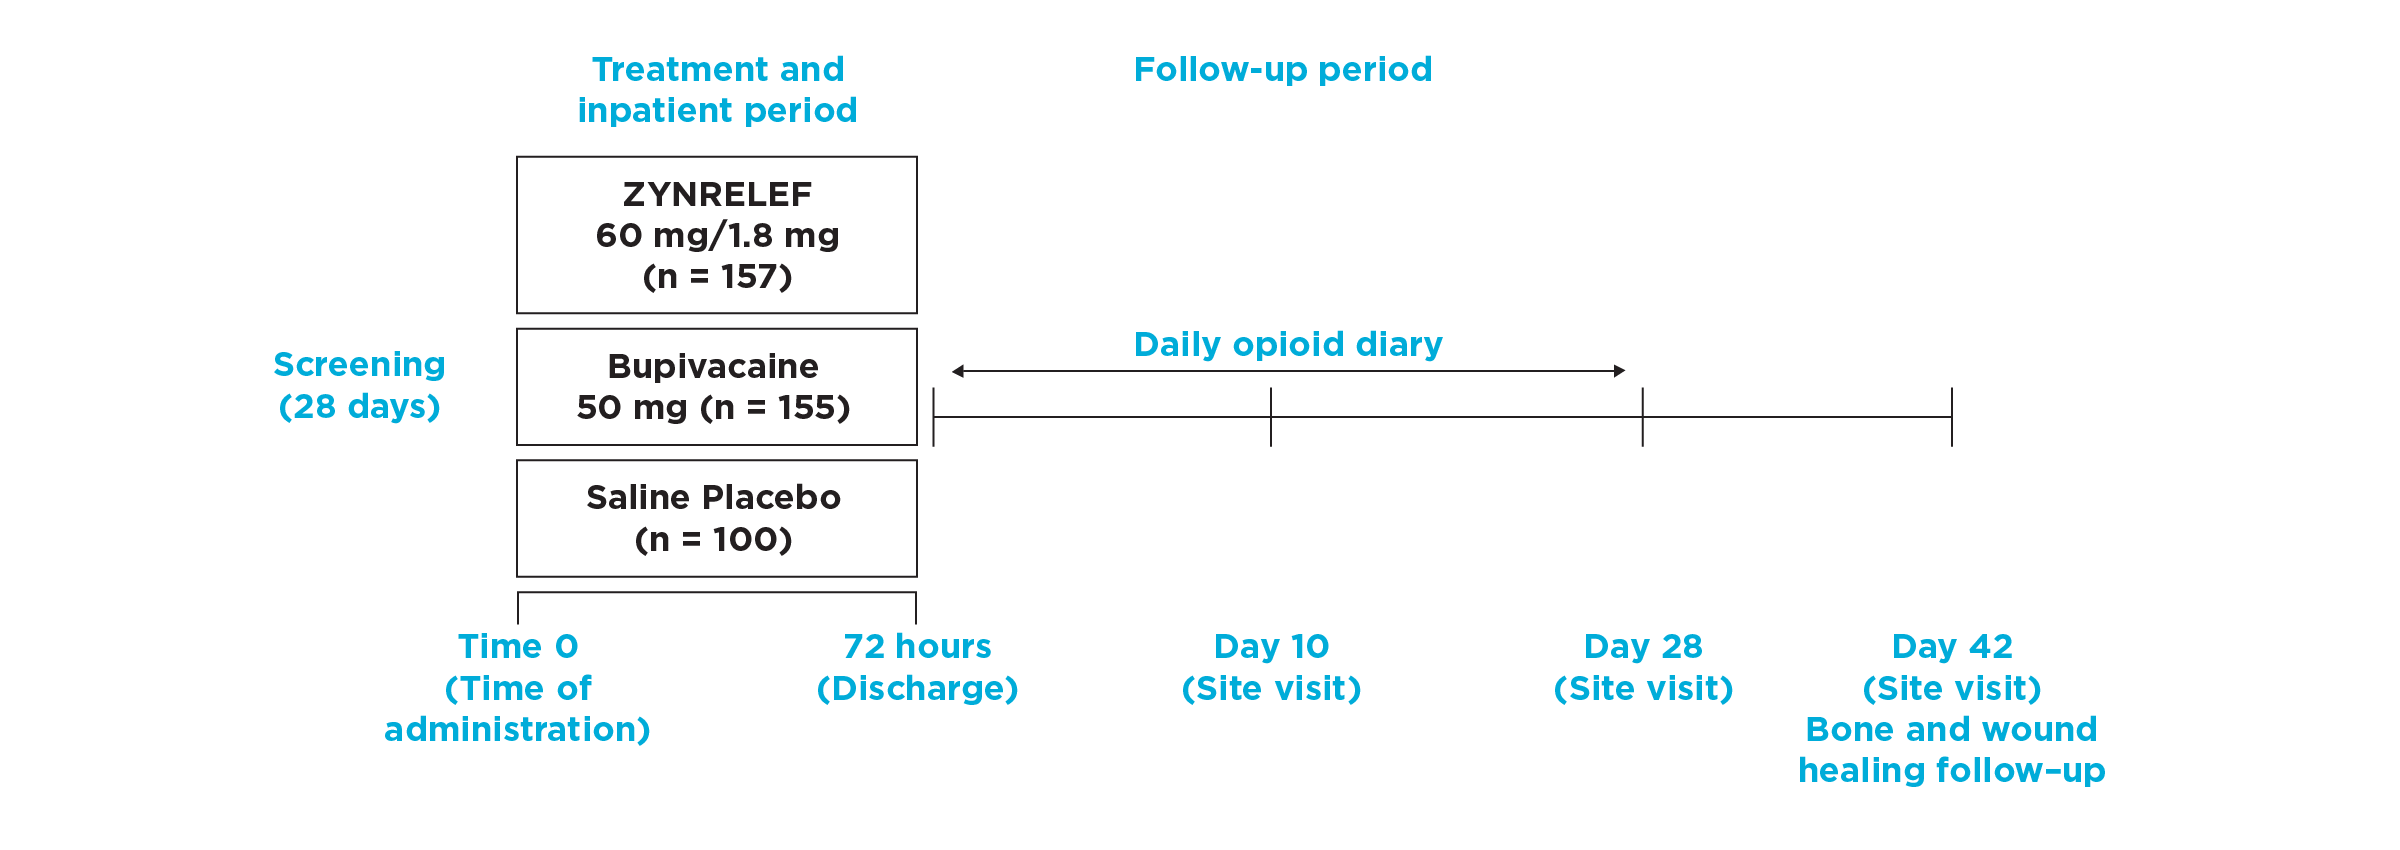 Timeline overview of EPOCH 1 Bunionectomy study design from screening through follow up.